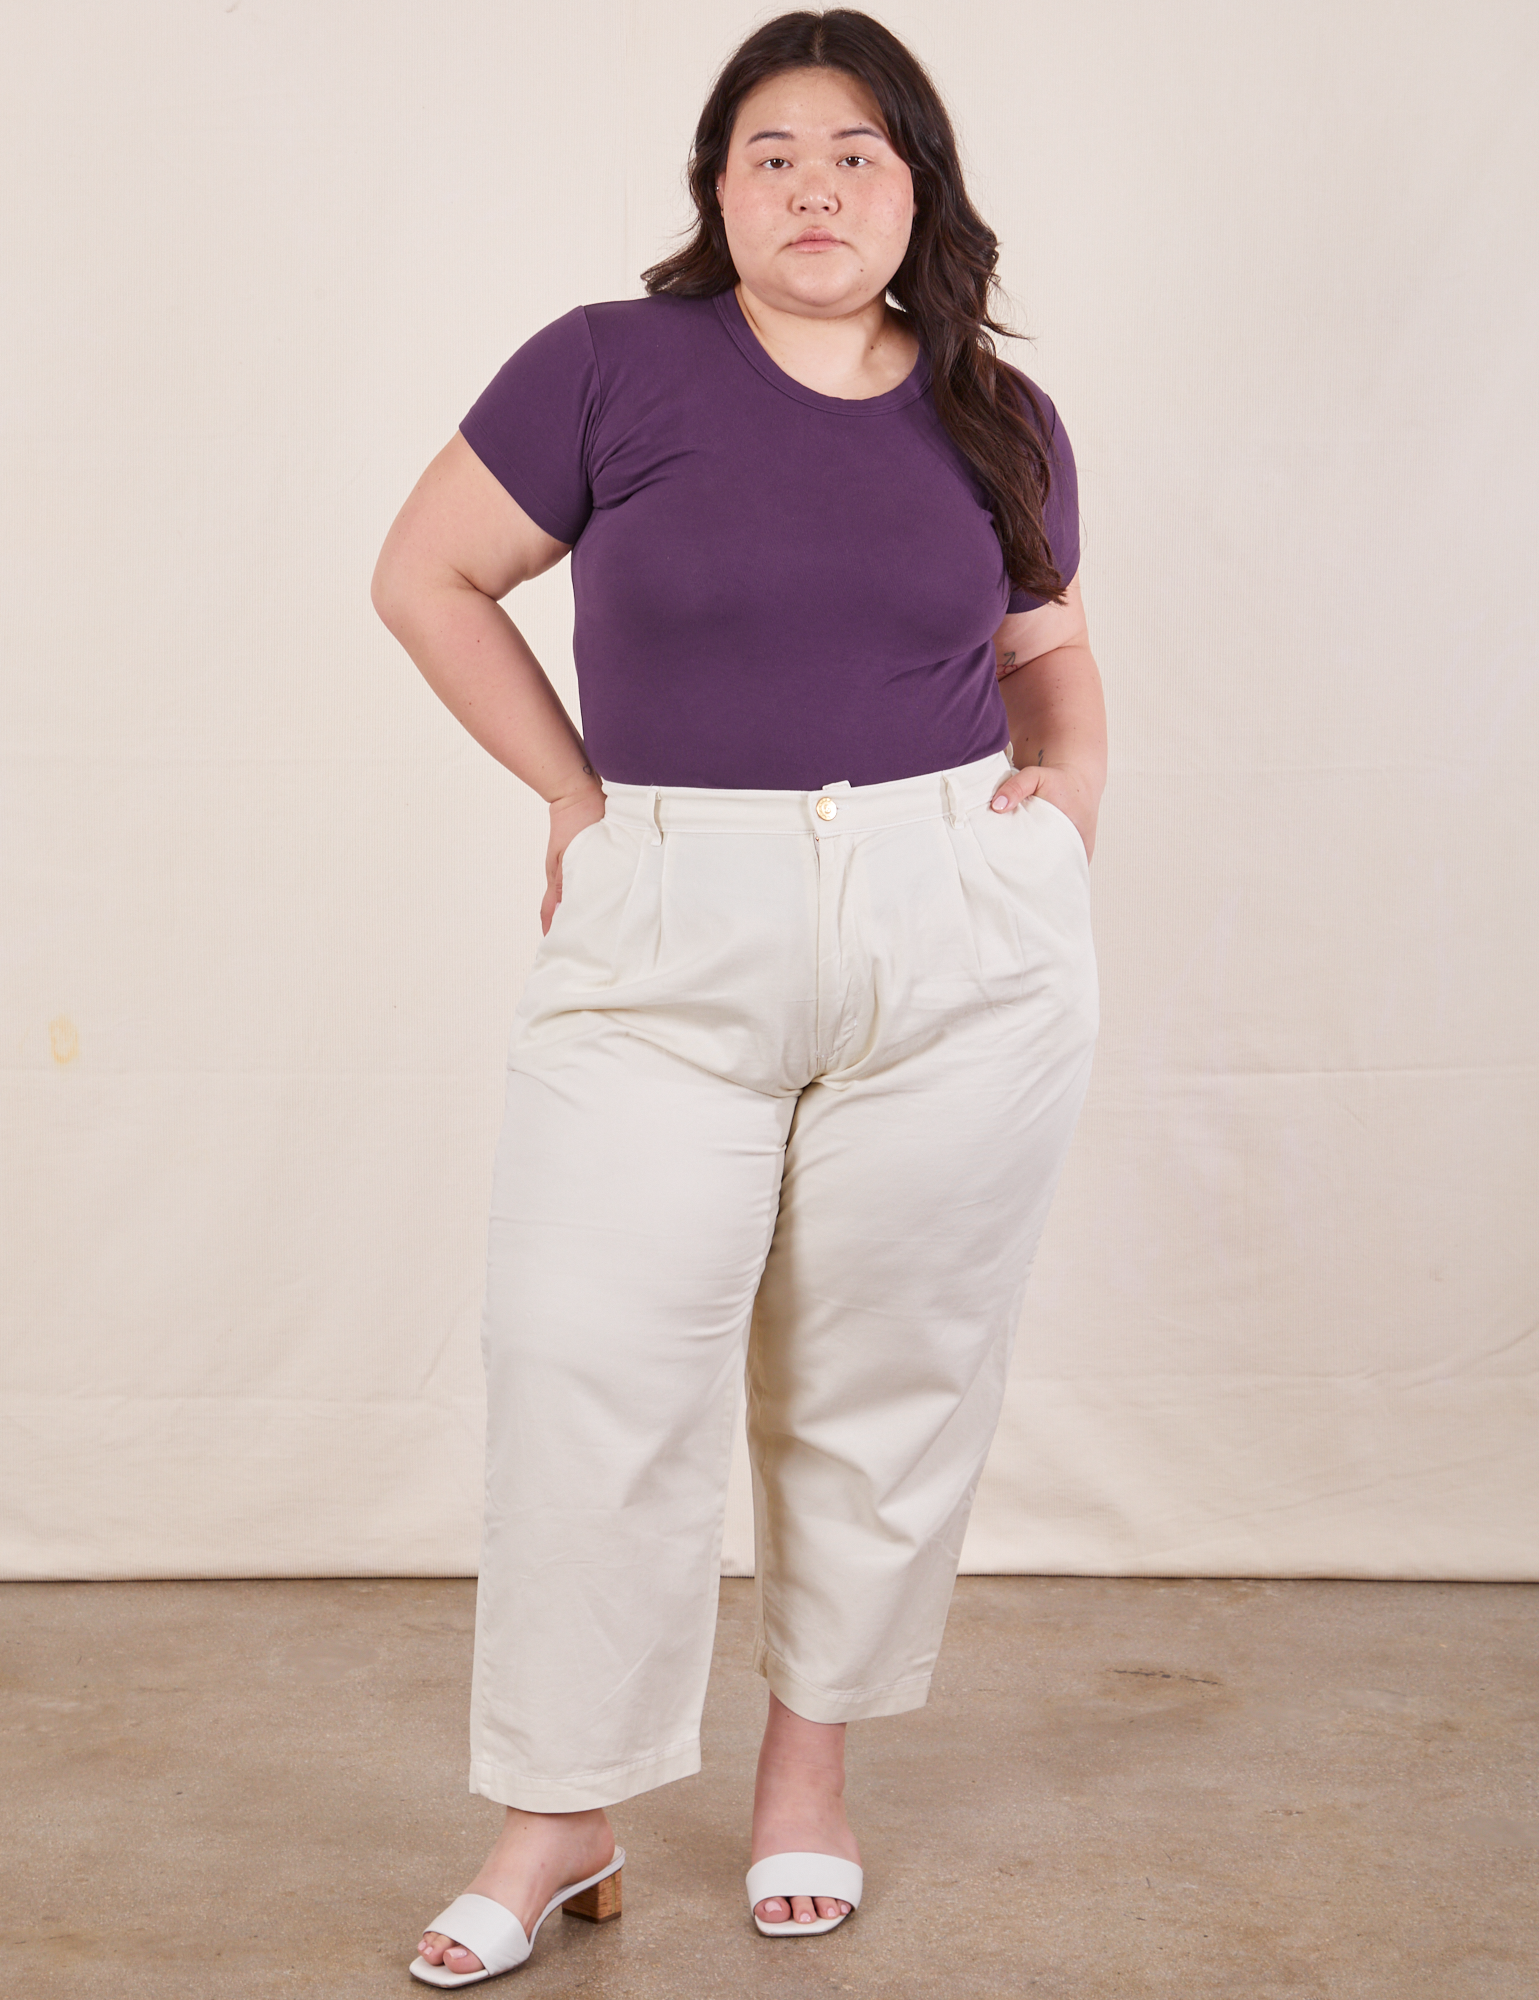 Ashley is wearing Baby Tee in Nebula Purple and vintage off-white Trousers